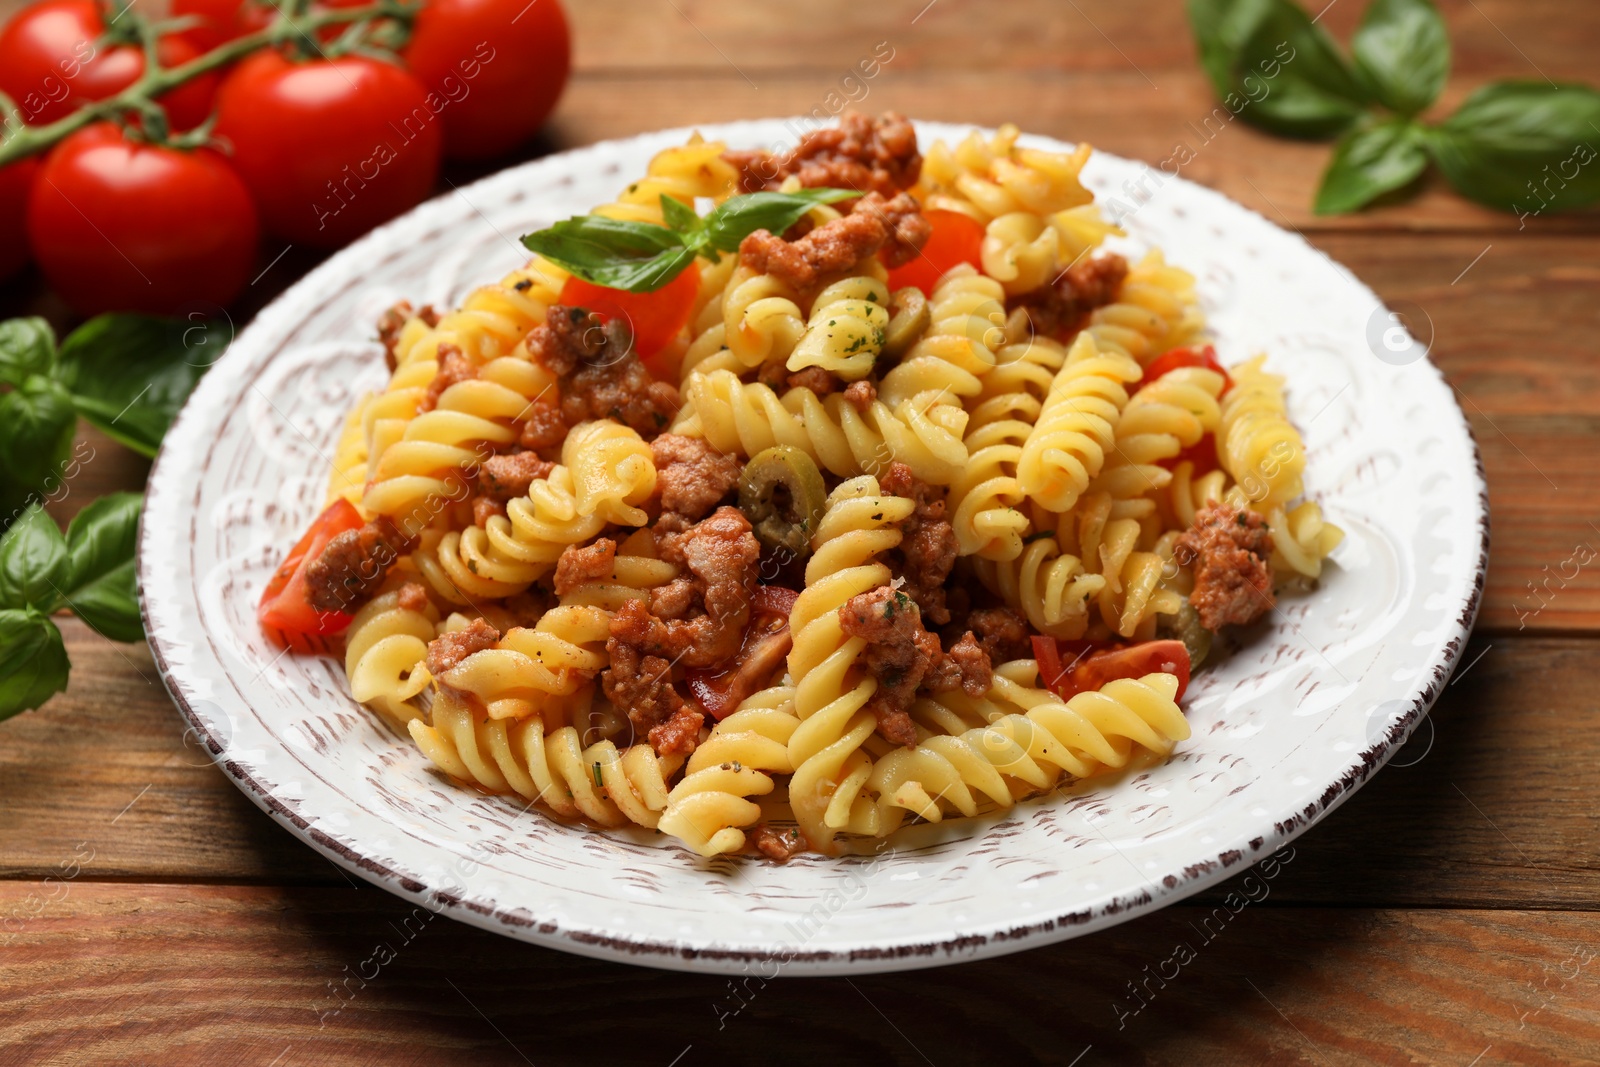 Photo of Plate of delicious pasta with minced meat, tomatoes and basil on wooden table, closeup